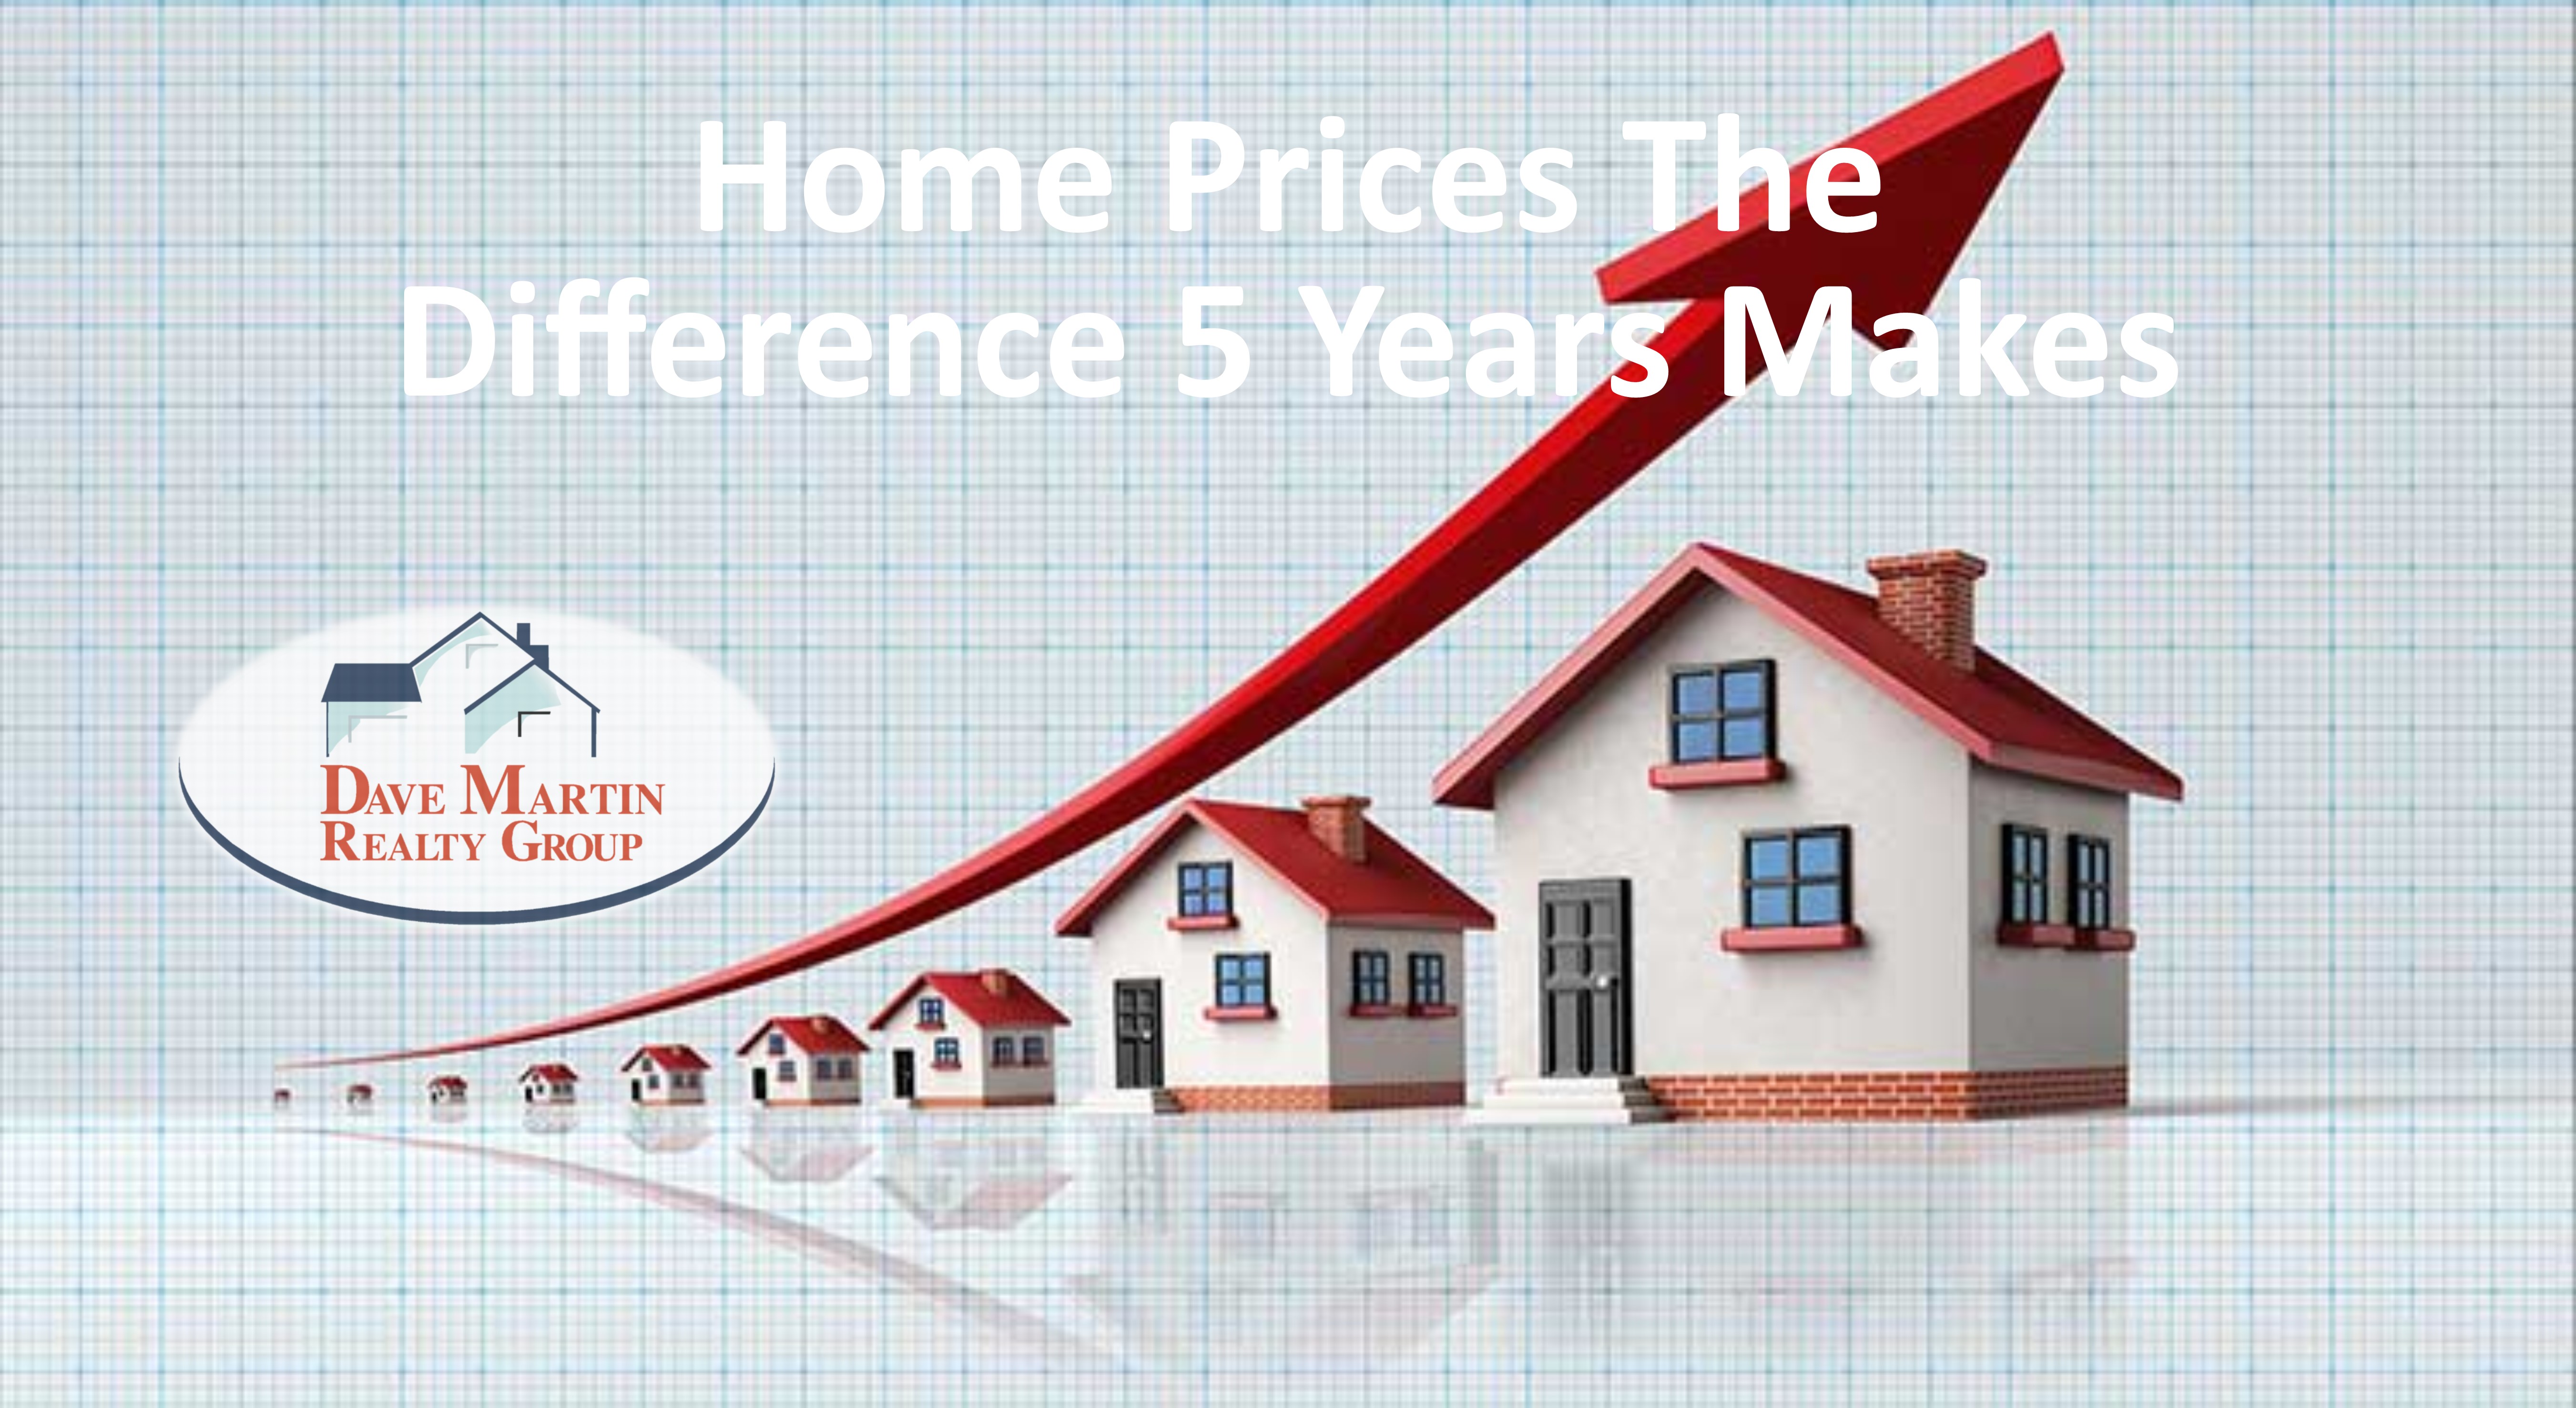 Runnymeade Alexanria Virginia 22310 Home Prices The Difference 5 Years Makes